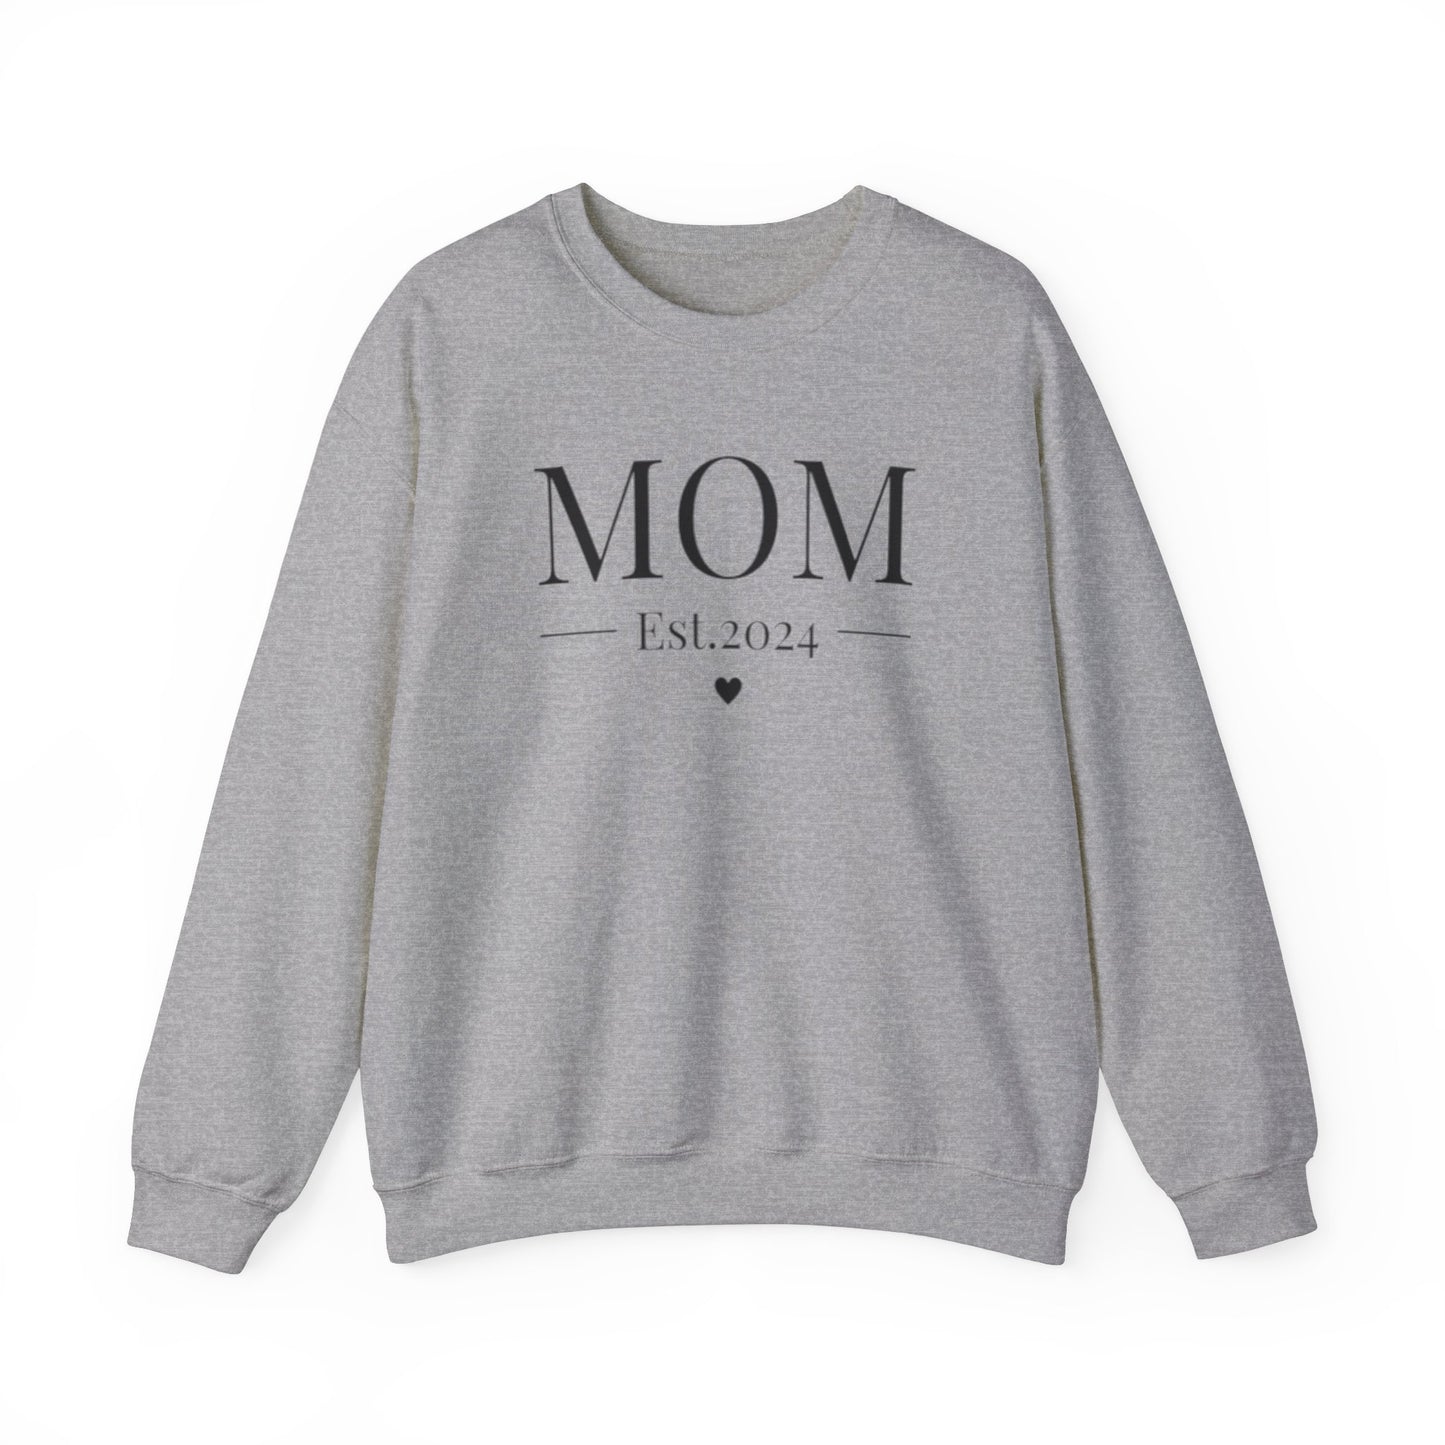 Mom 2024 Crewneck Sweatshirt (available as a tank top $17 or T-Shirt $20 too!)